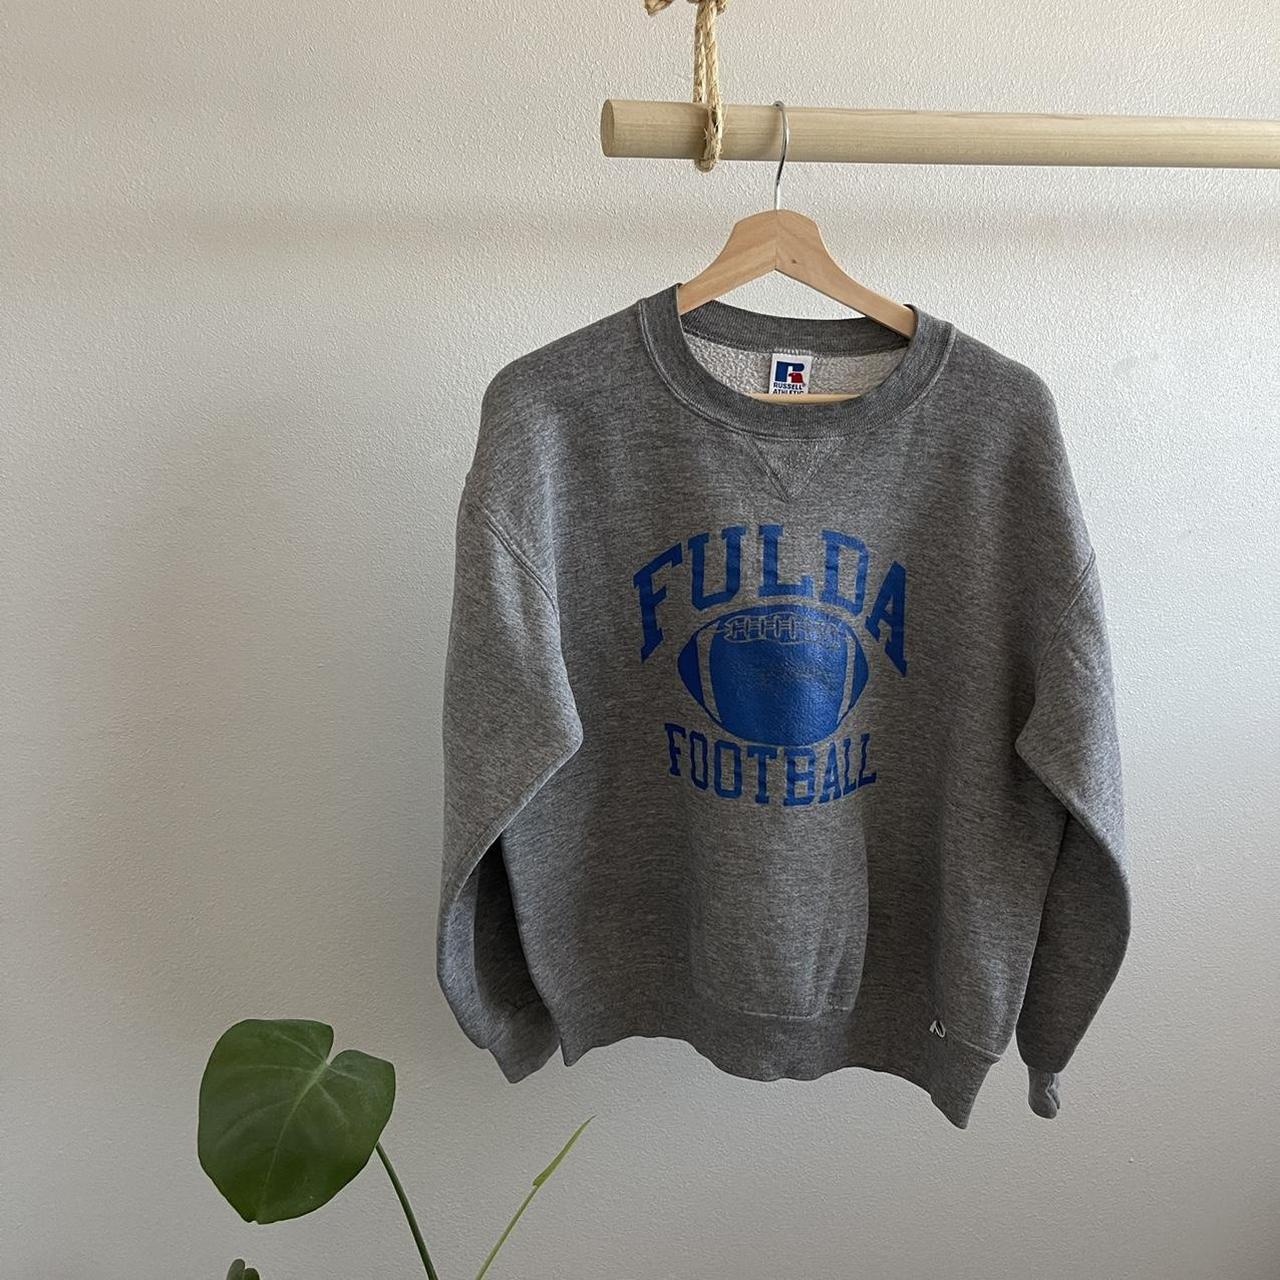 Russell Athletic Men's Grey and Blue Sweatshirt